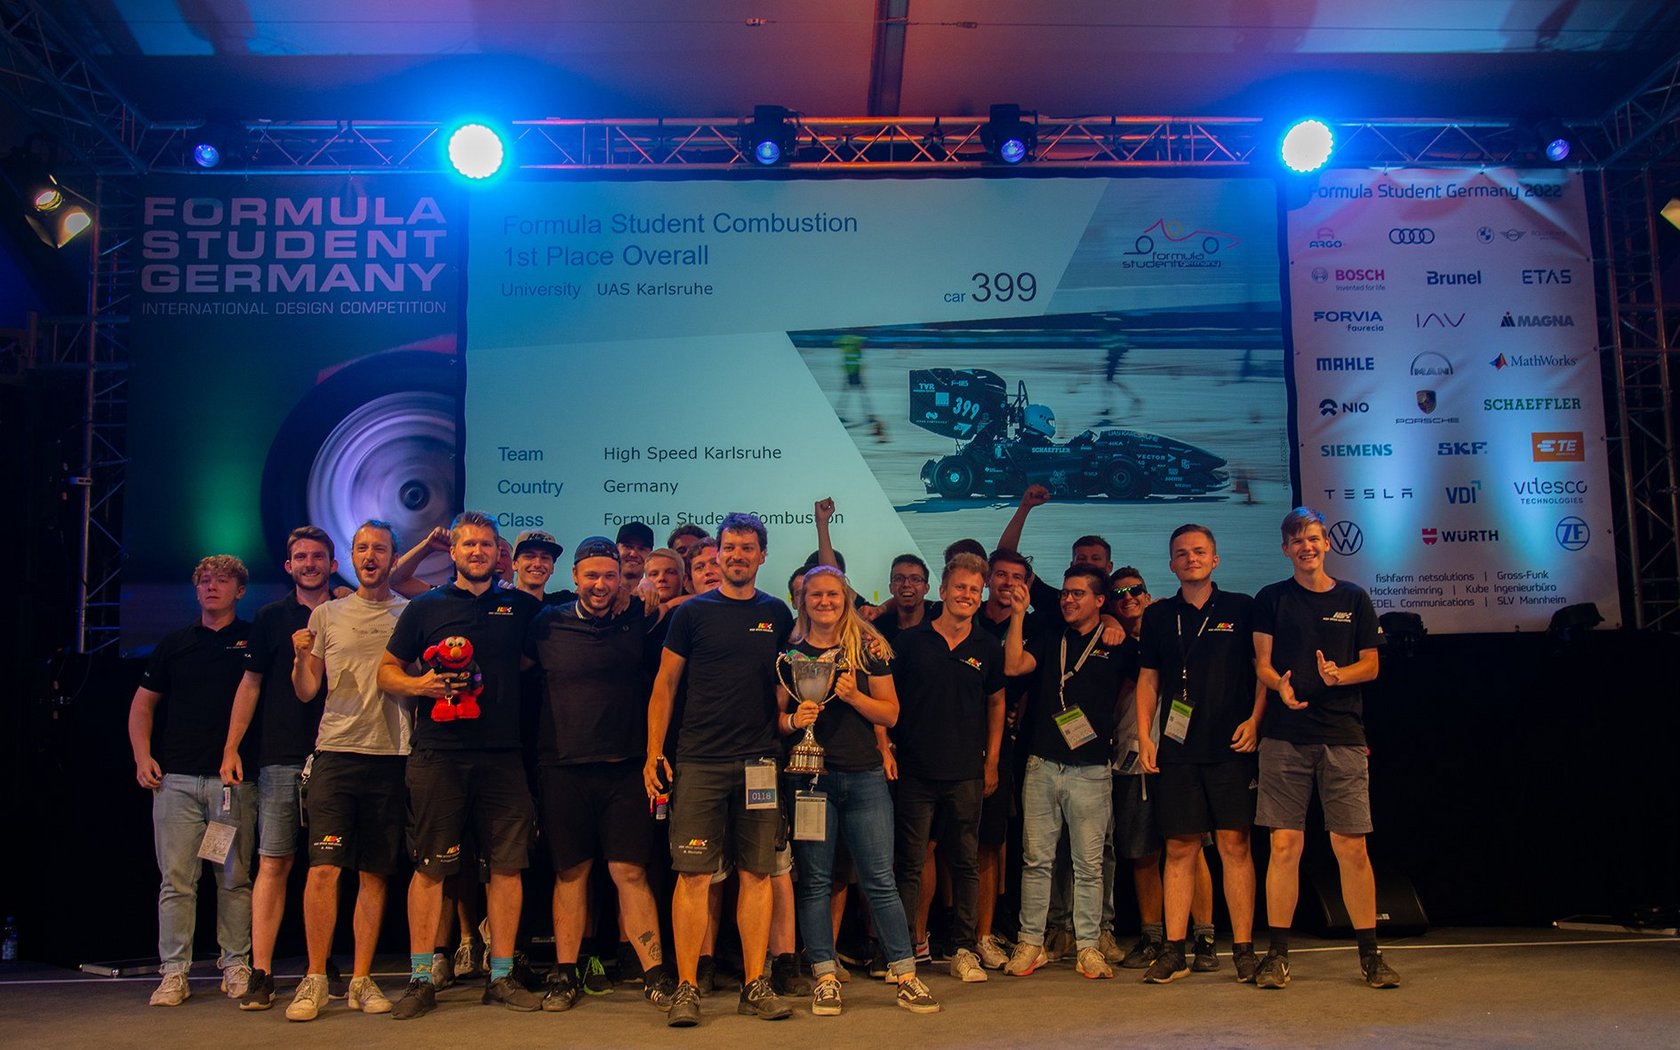 Team High Speed Karlsruhe on a stage